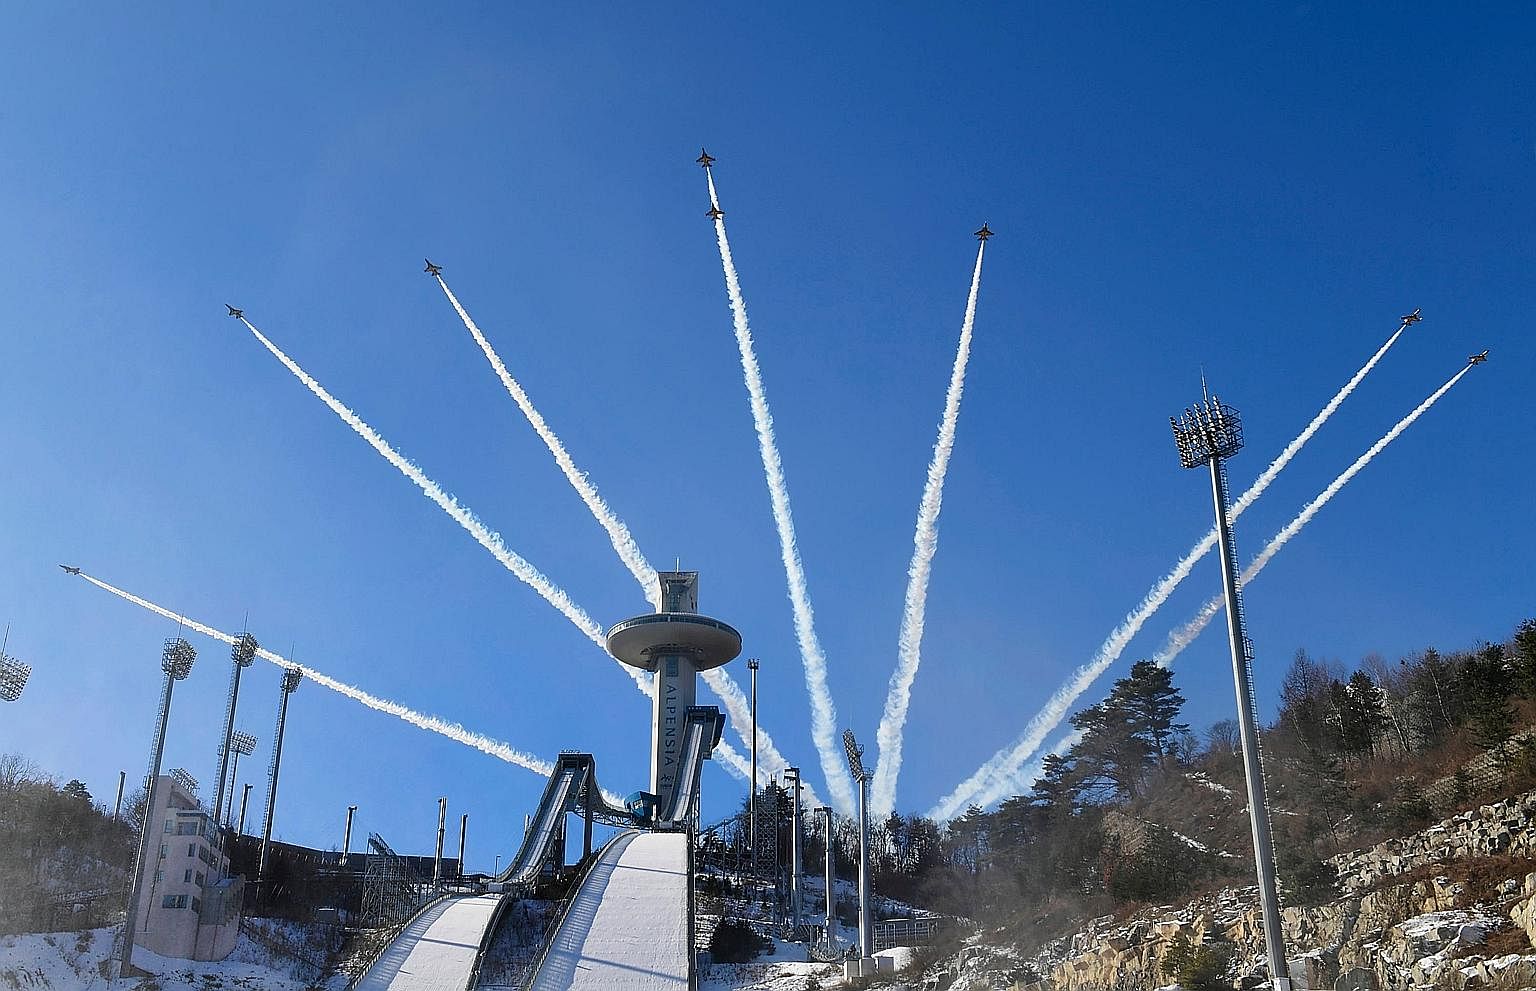 Members of the South Korean air force Black Eagle aerobatic team performing above the ski jump venue of the Pyeongchang 2018 Winter Olympics earlier this week. North Korea is sending a delegation consisting of athletes, high-ranking officials and a c